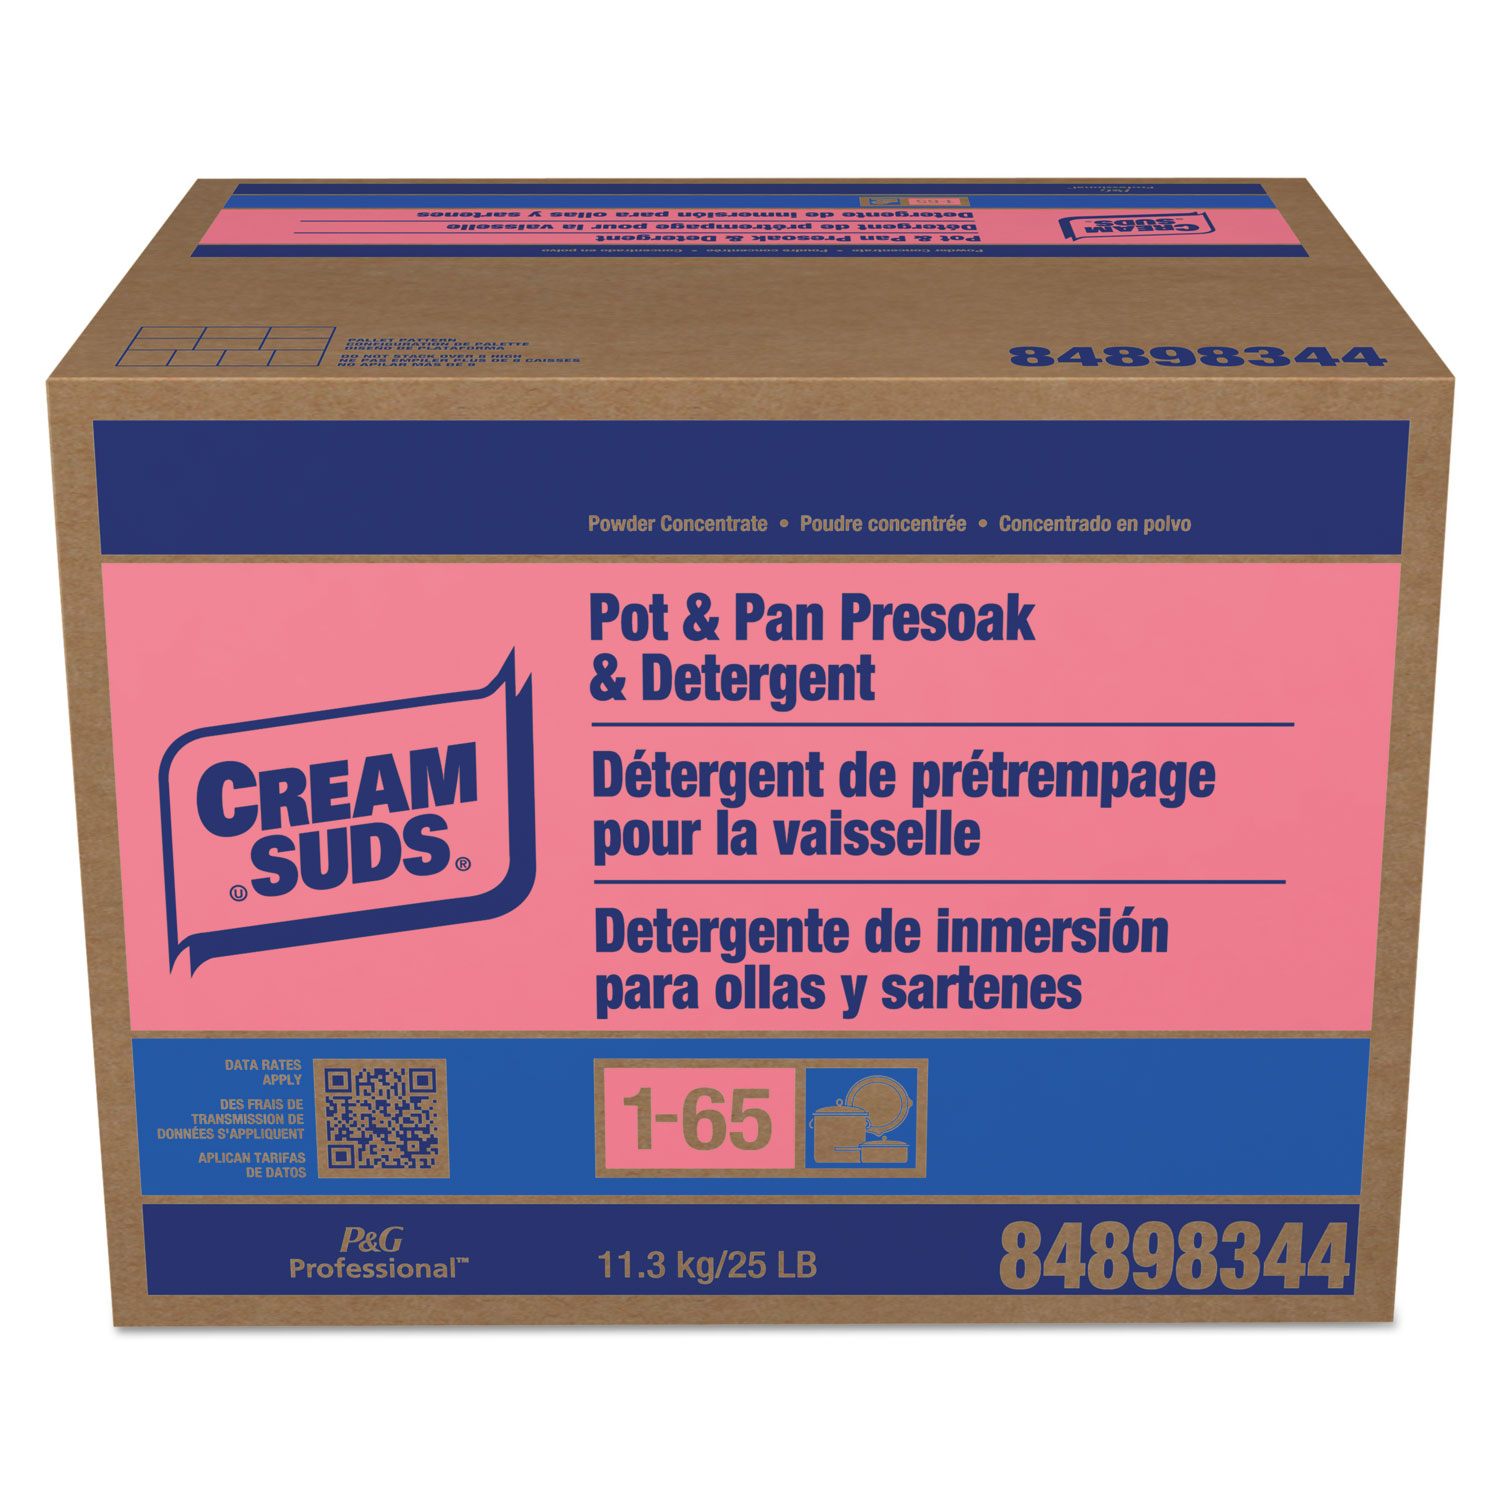  Cream Suds 02120 Manual Pot and Pan Detergent with o Phosphate, Baby Powder Scent, Powder, 25 lb Box (PBC02120) 